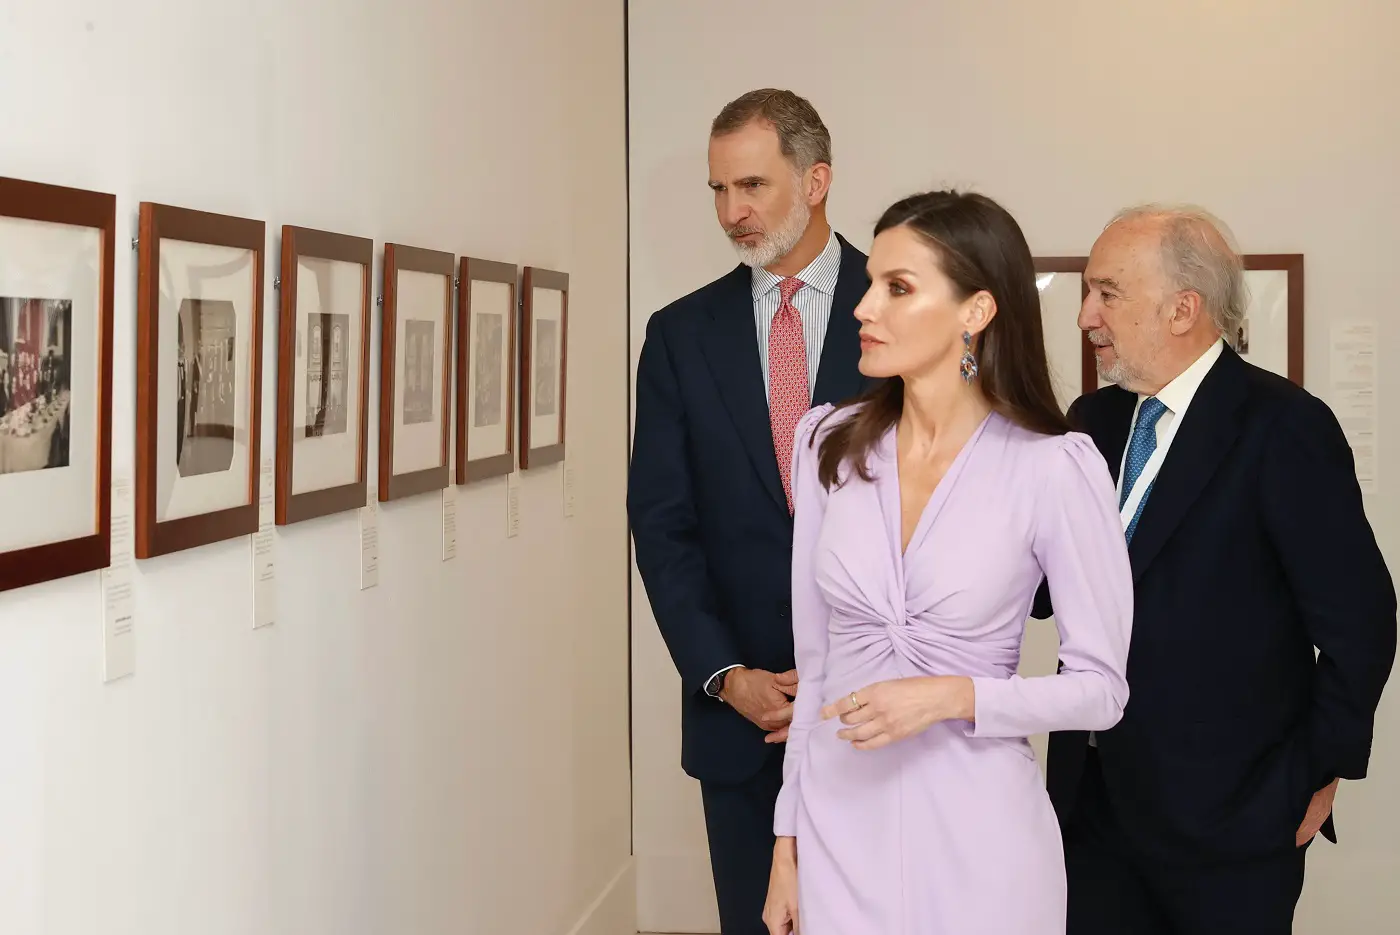 Queen Letizia in Lilac for inauguration of the IX International Congress of the Spanish Language